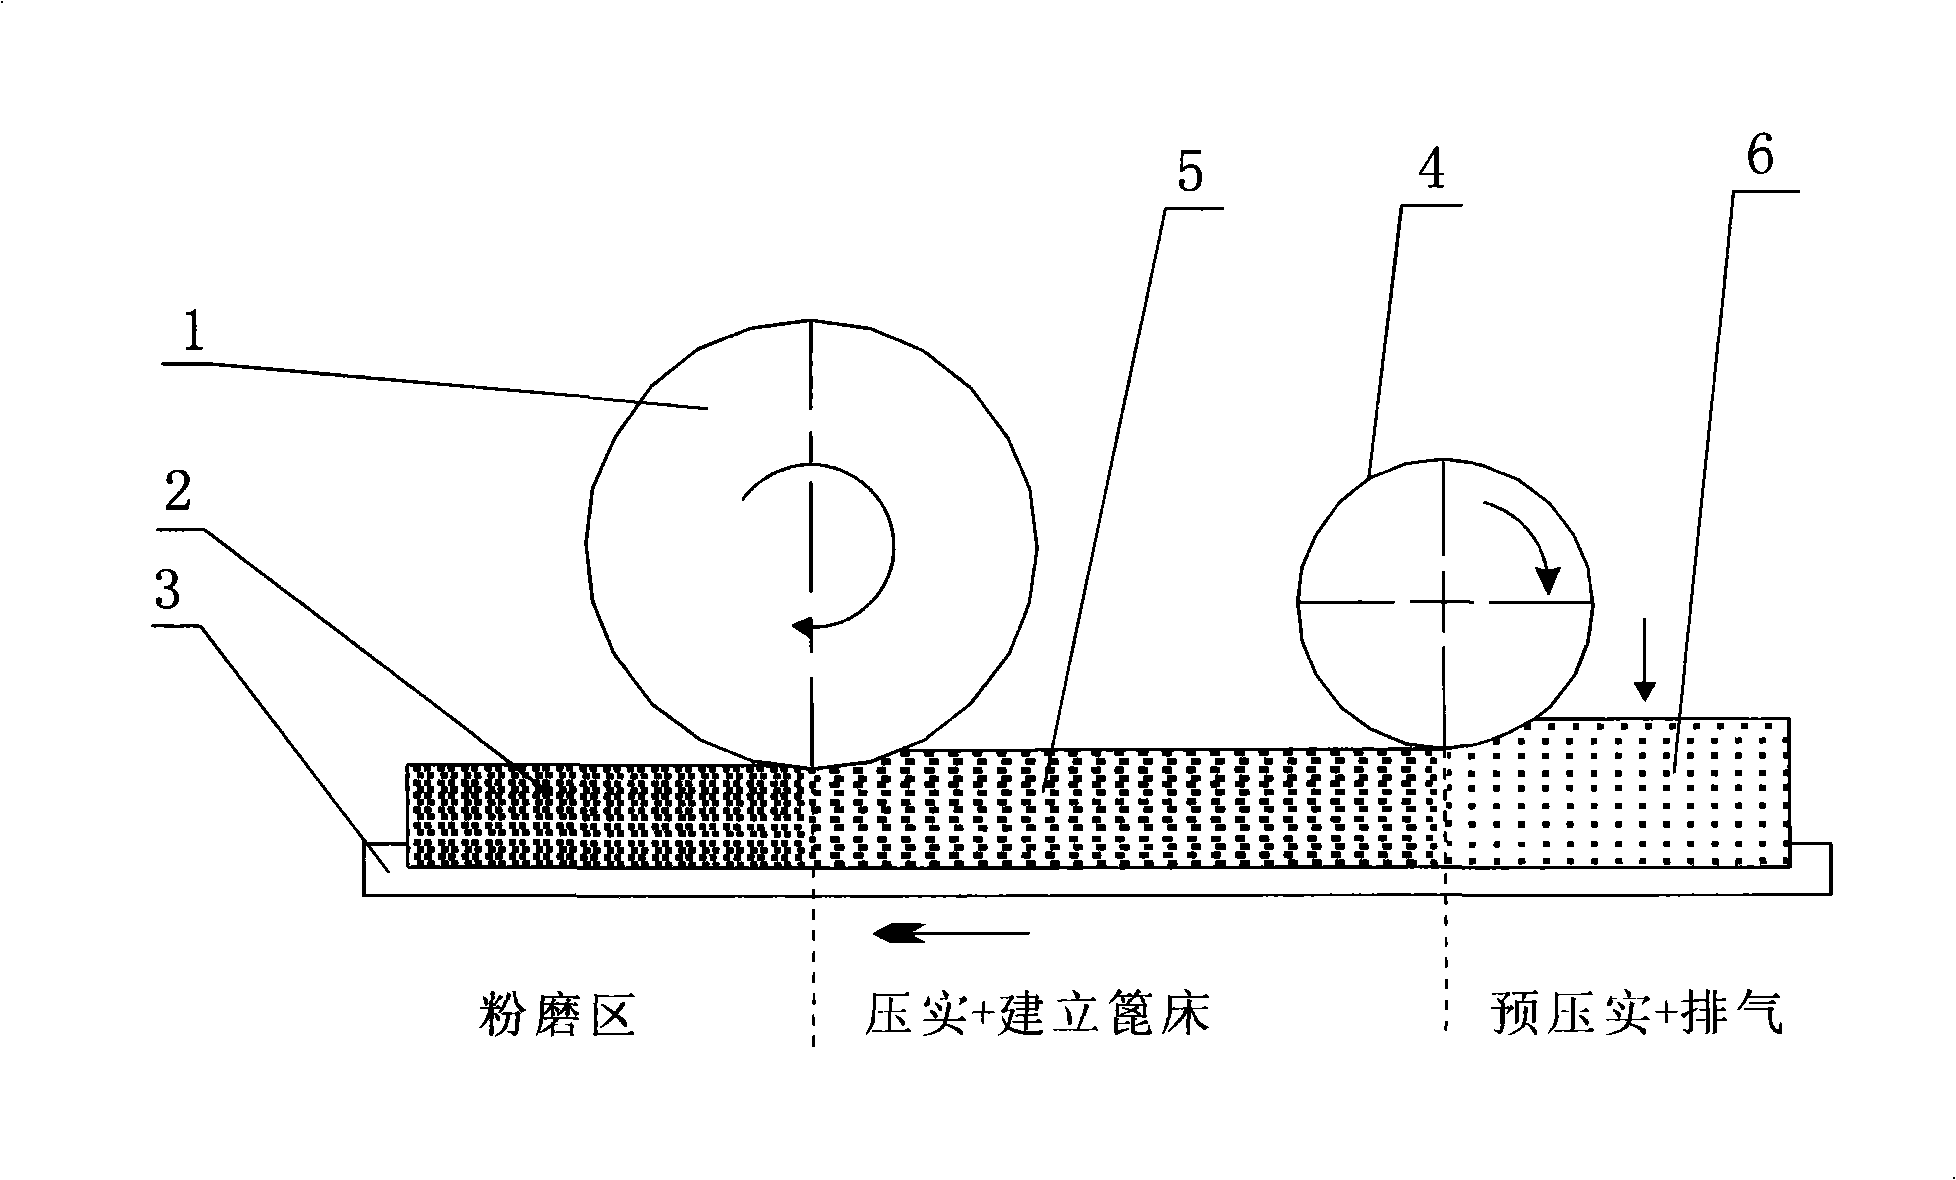 Method and apparatus for flattening, compacting and crushing material